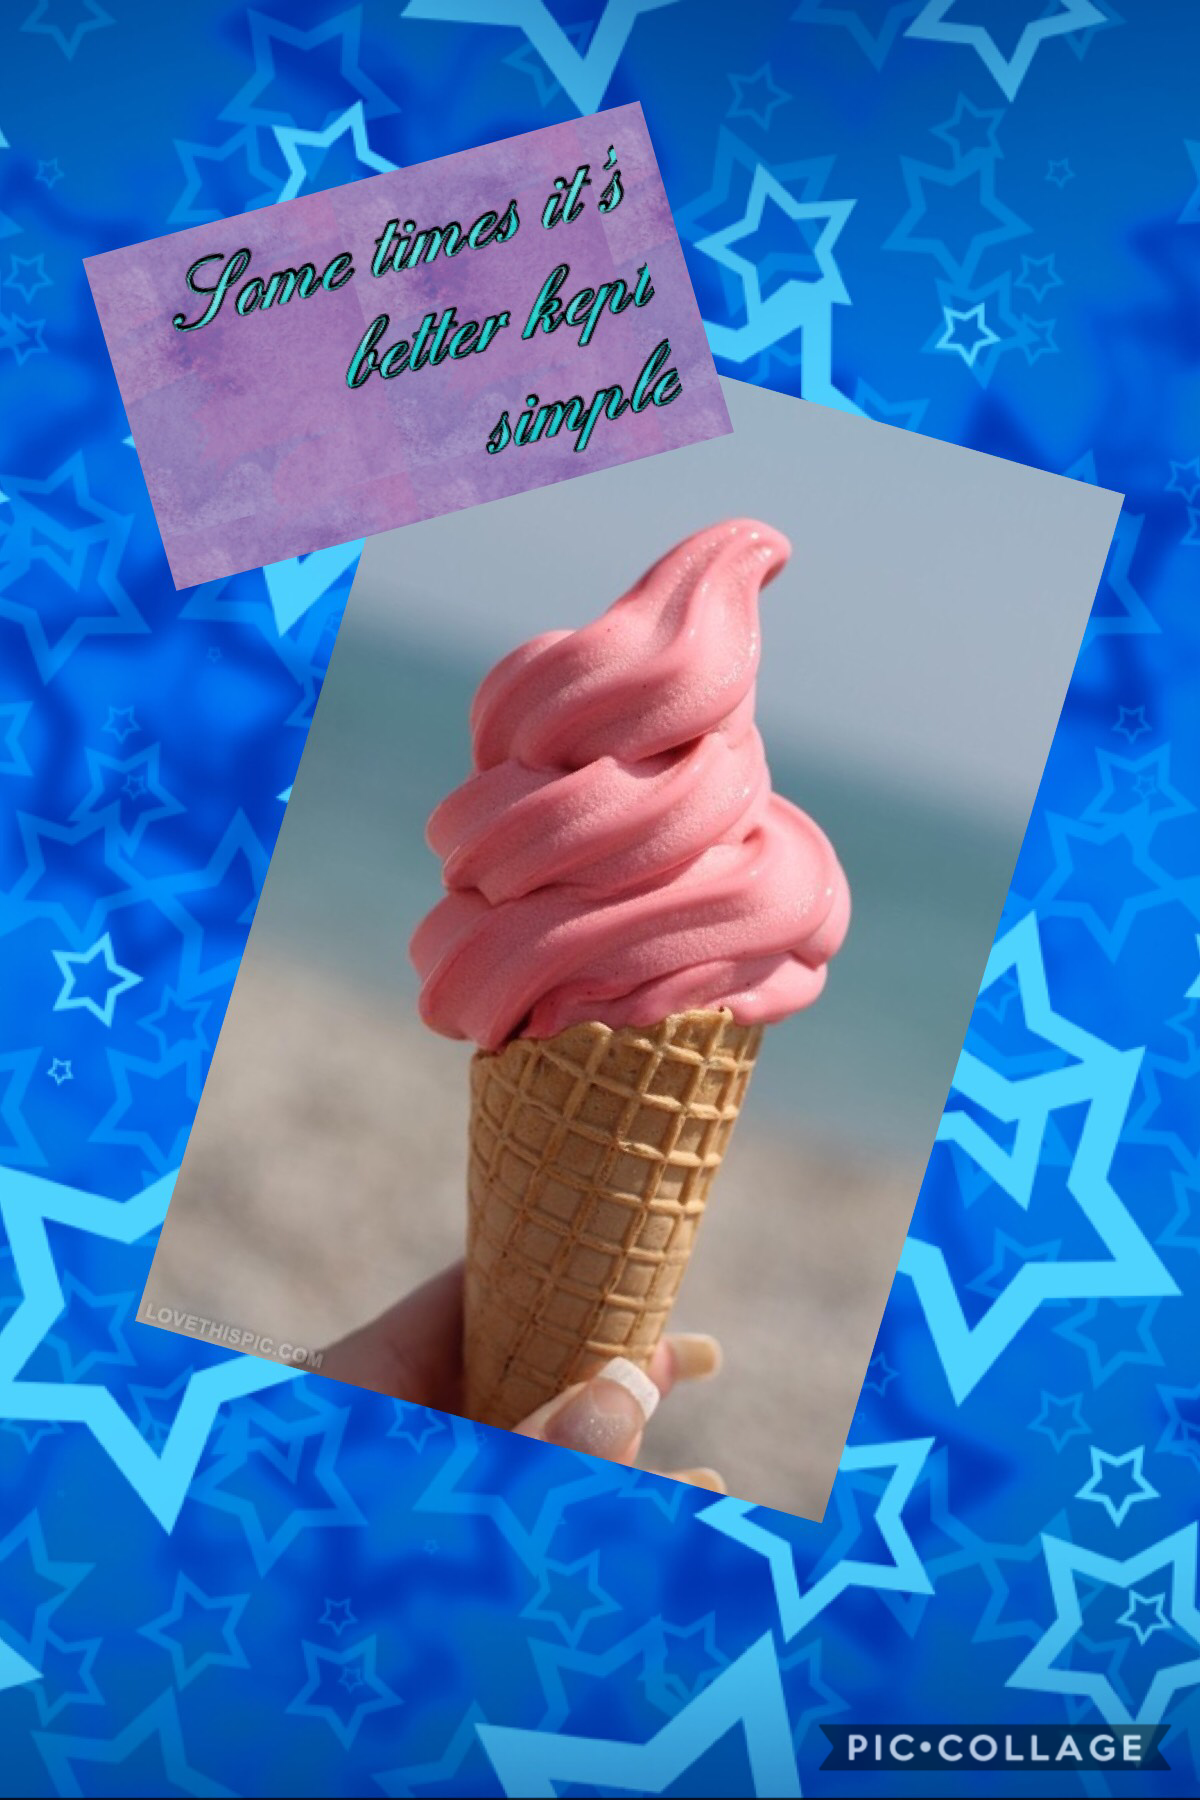 🤩Tap🤩
Simple ice creams are sometimes better!!!!!!!
😜😜😜😜😜😜😜💝💝💞💞💞💞💞💞💘💘💘💕💕💕💕